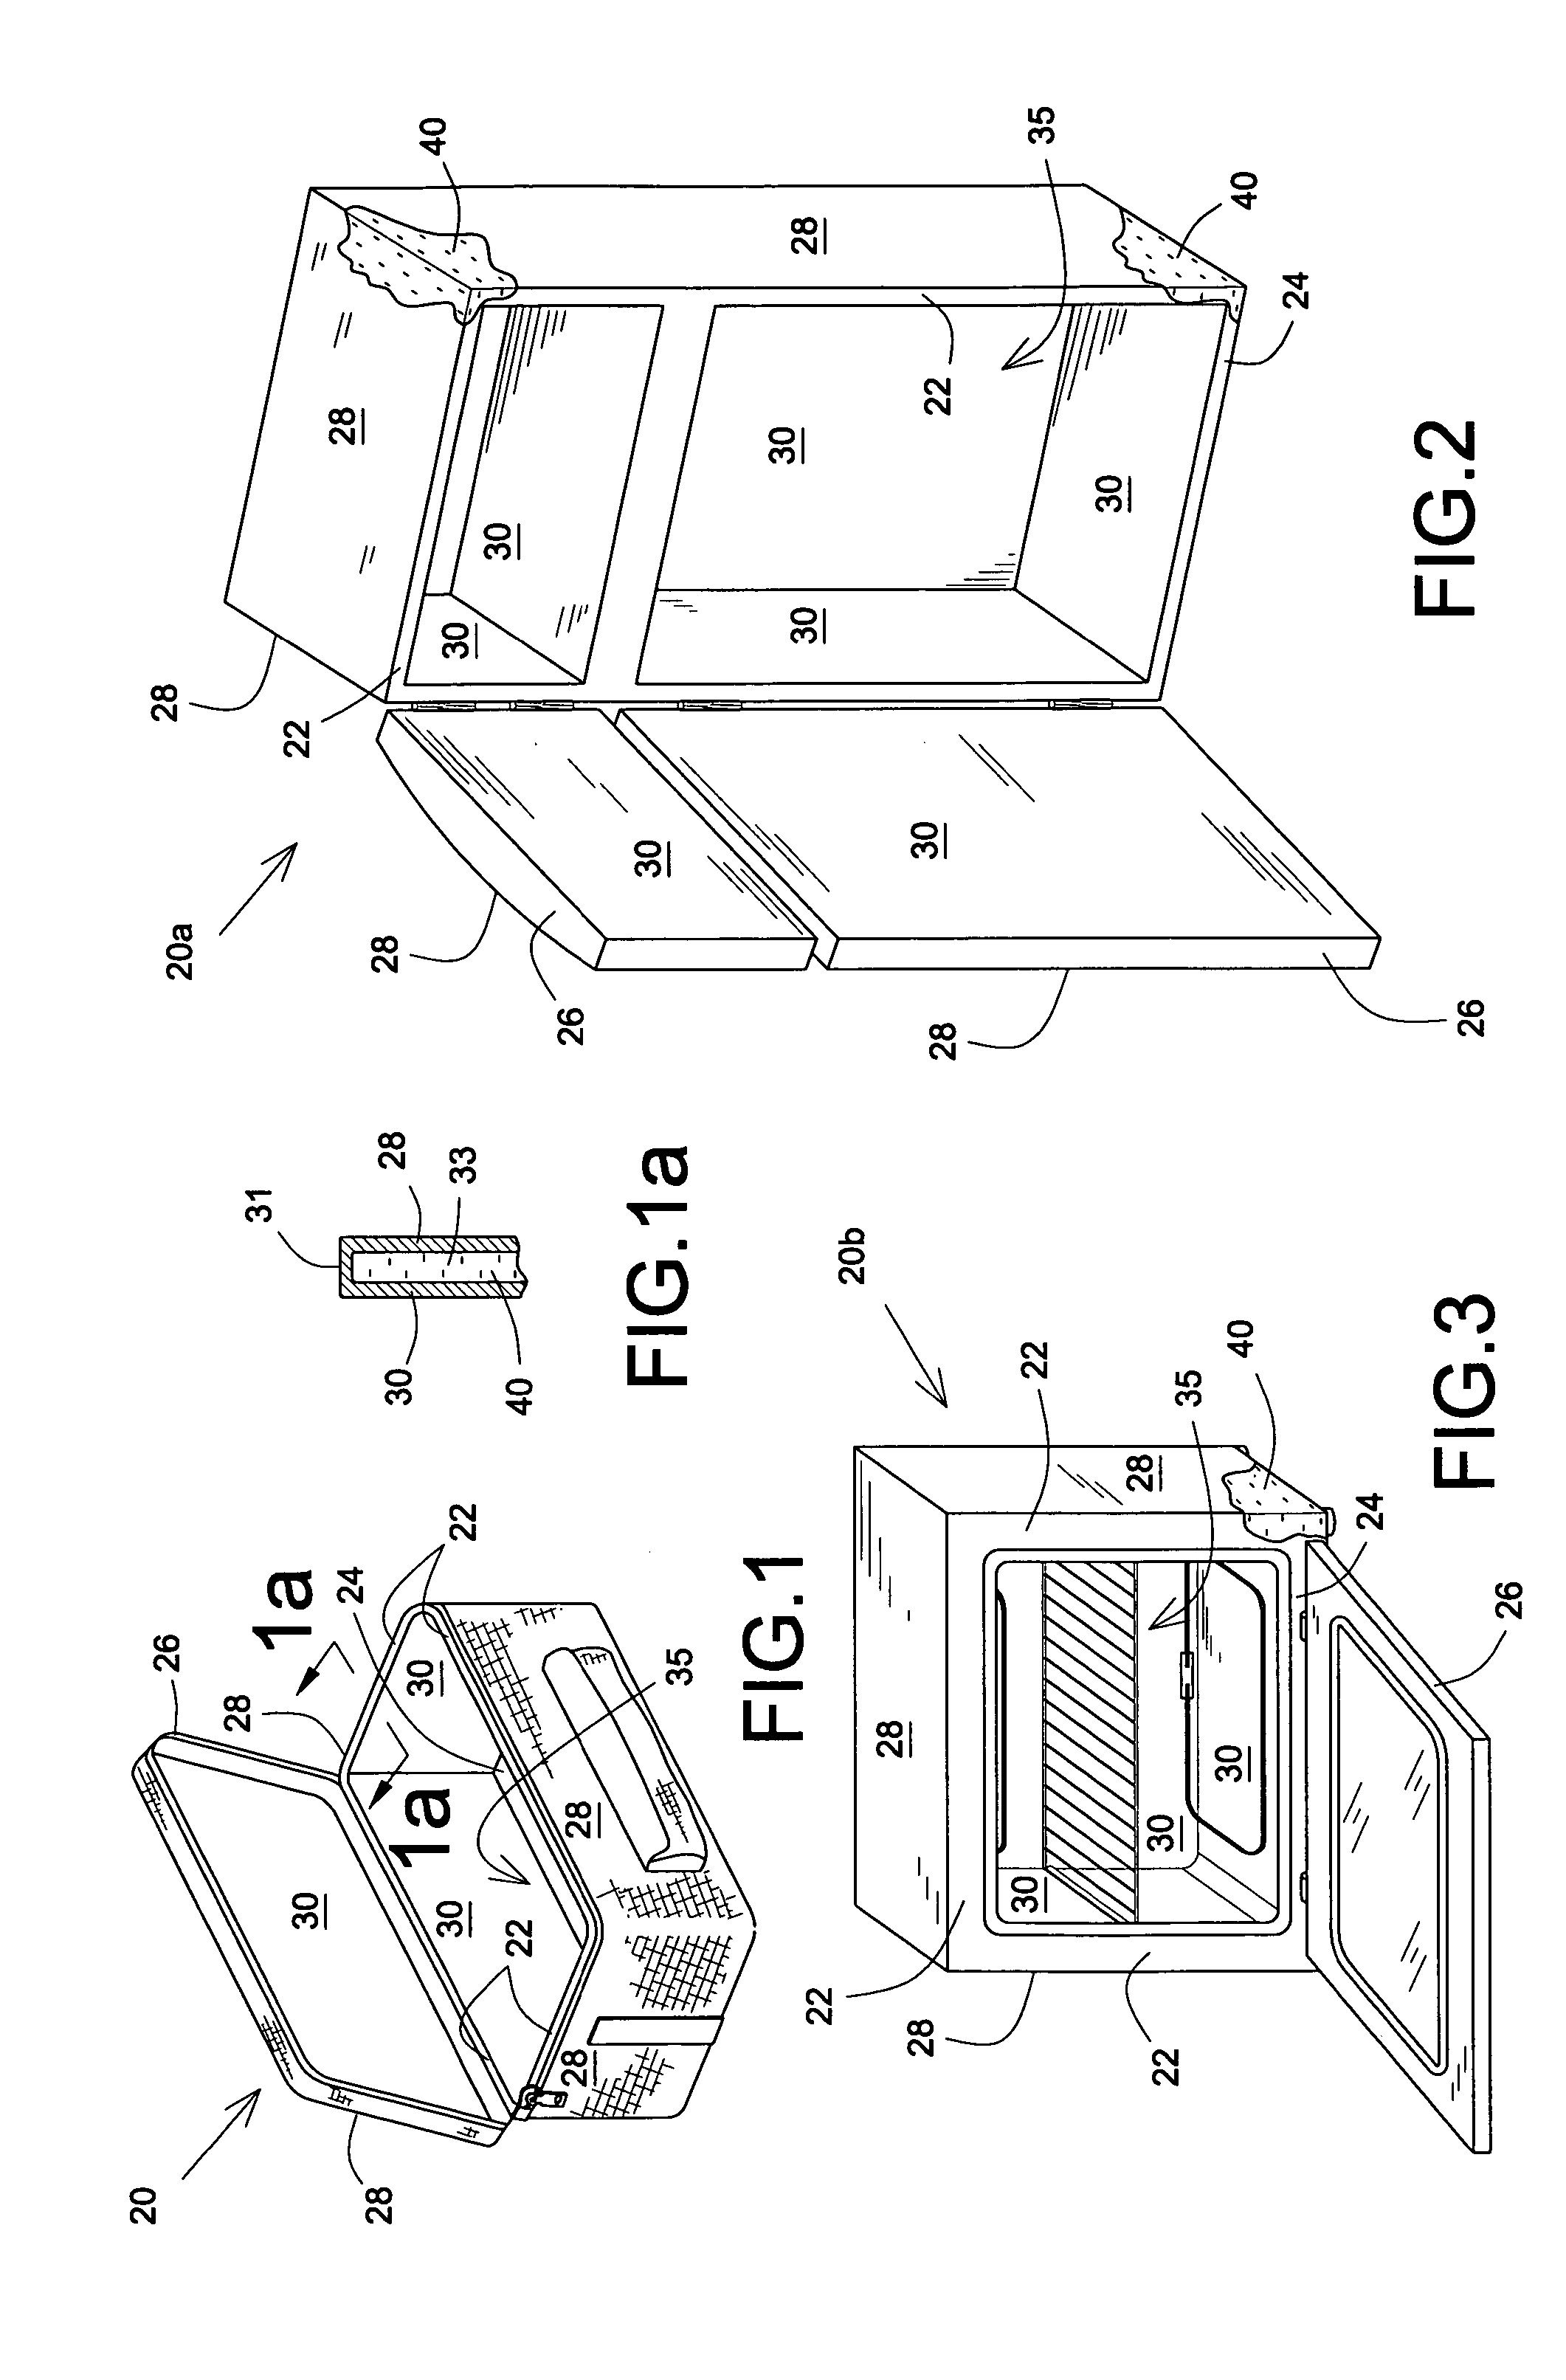 Self-contained gel insulated container